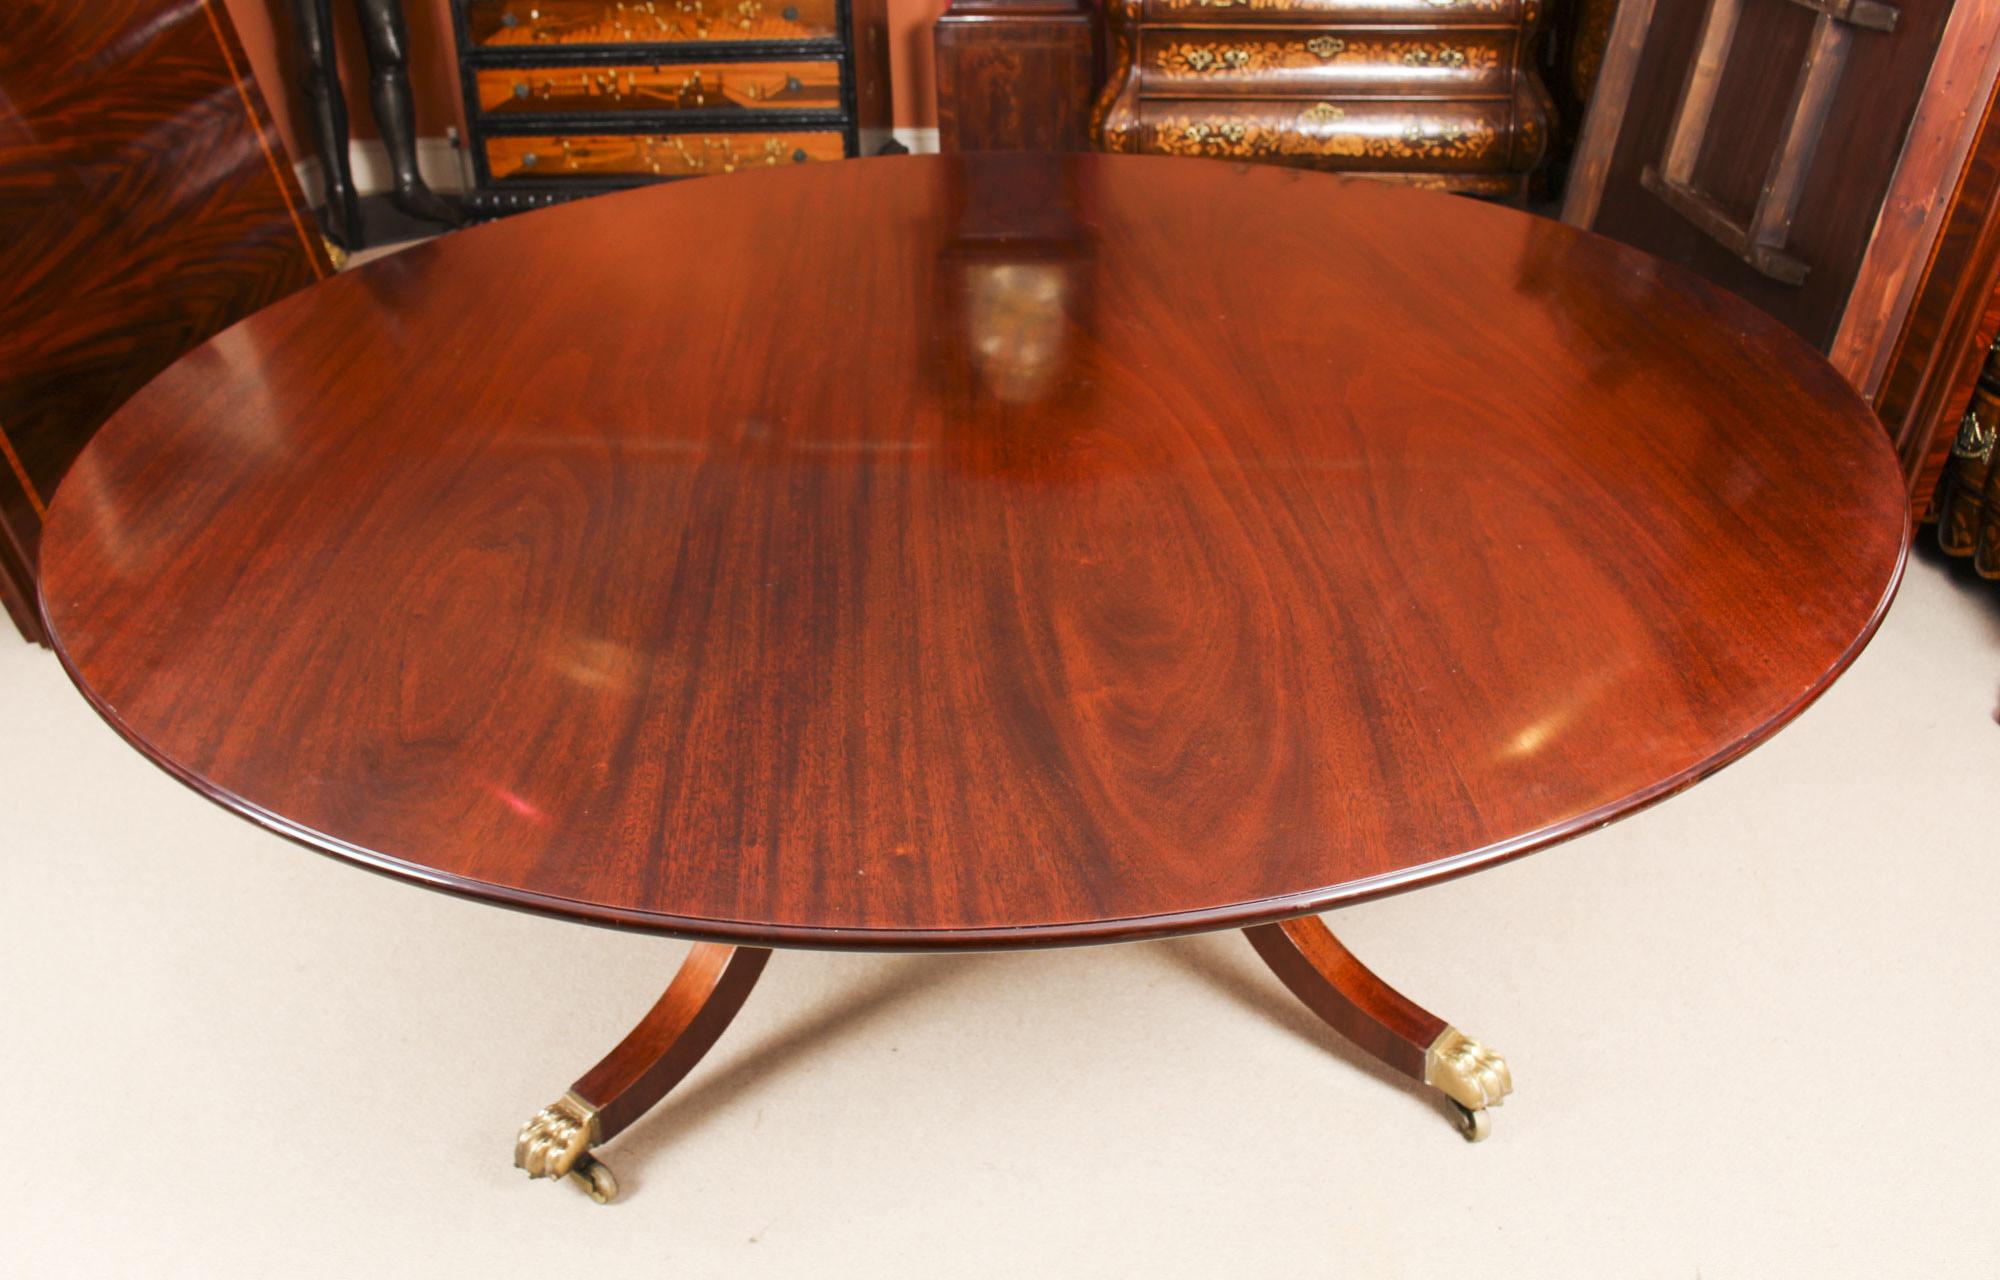 Regency Revival Vintage Diam Dining Table by William Tillman, 20th Century For Sale